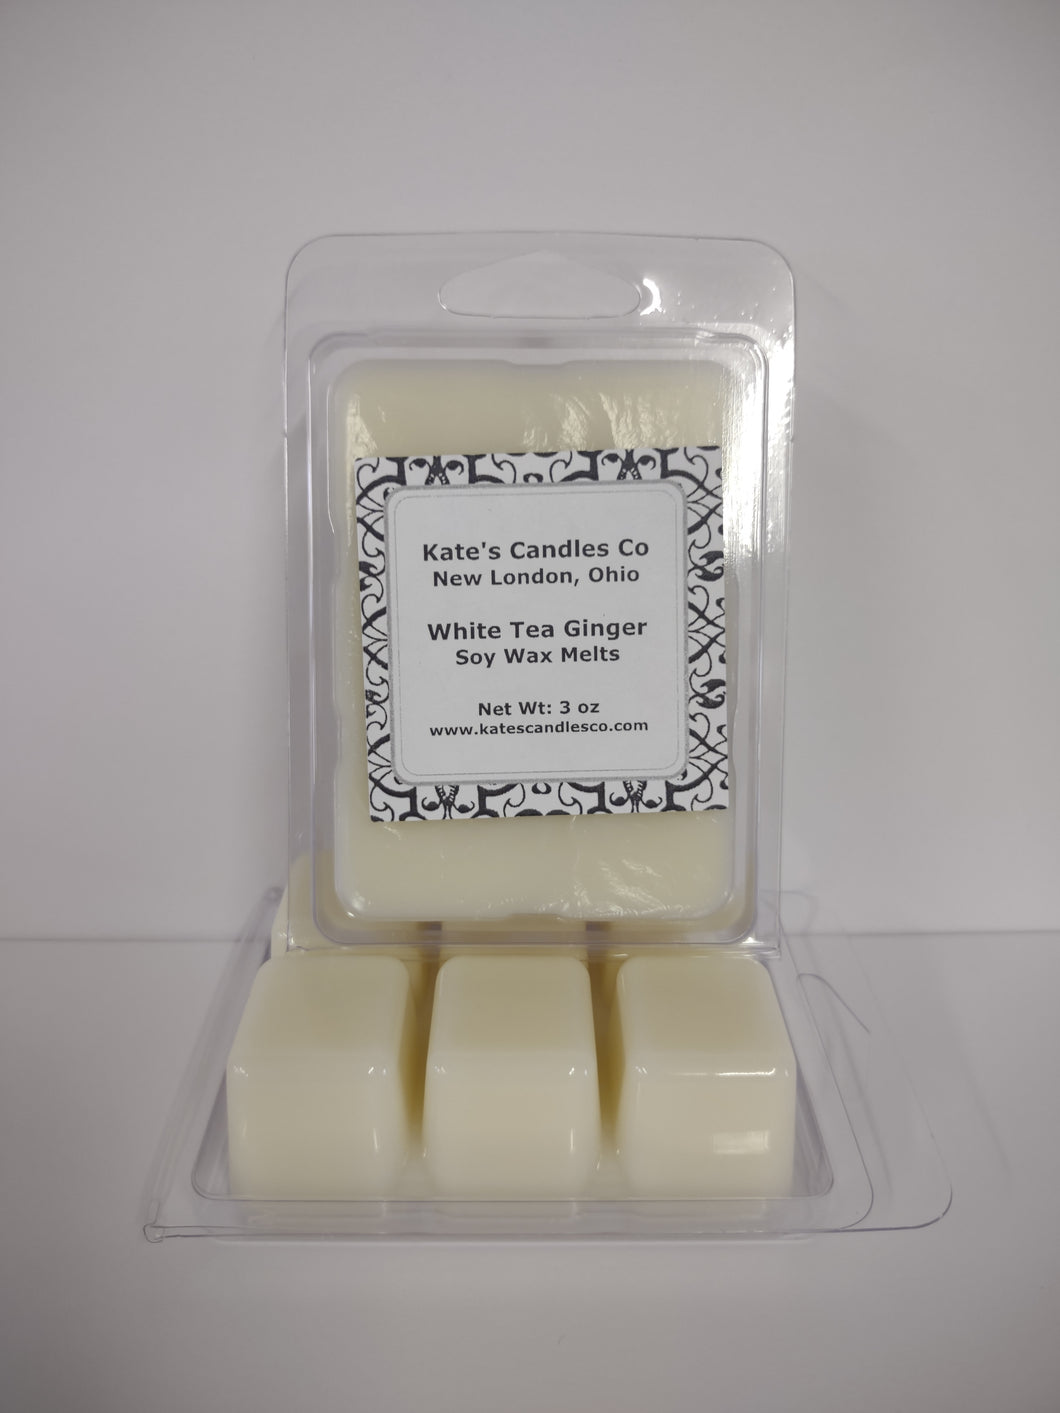 White Tea Ginger Soy Wax Melts - Kate's Candles Co.